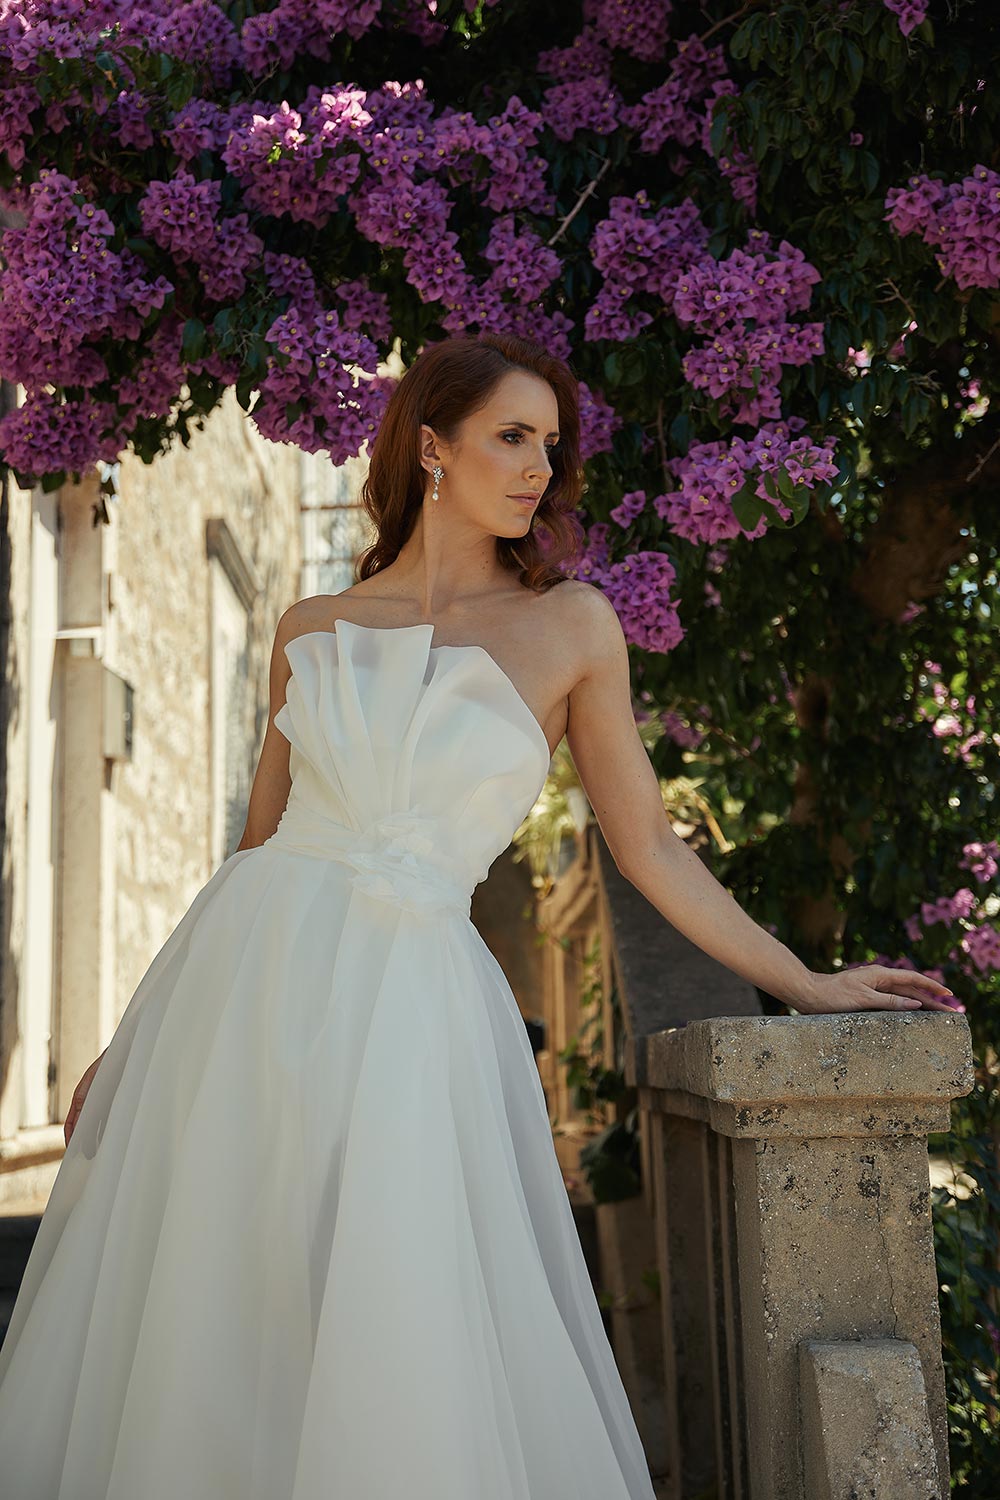 Rosana - bridal gown that embodies timeless elegance. Features satin organza, a strapless bodice, sweeping train, and hand-crafted rosette. On steps in Croatia